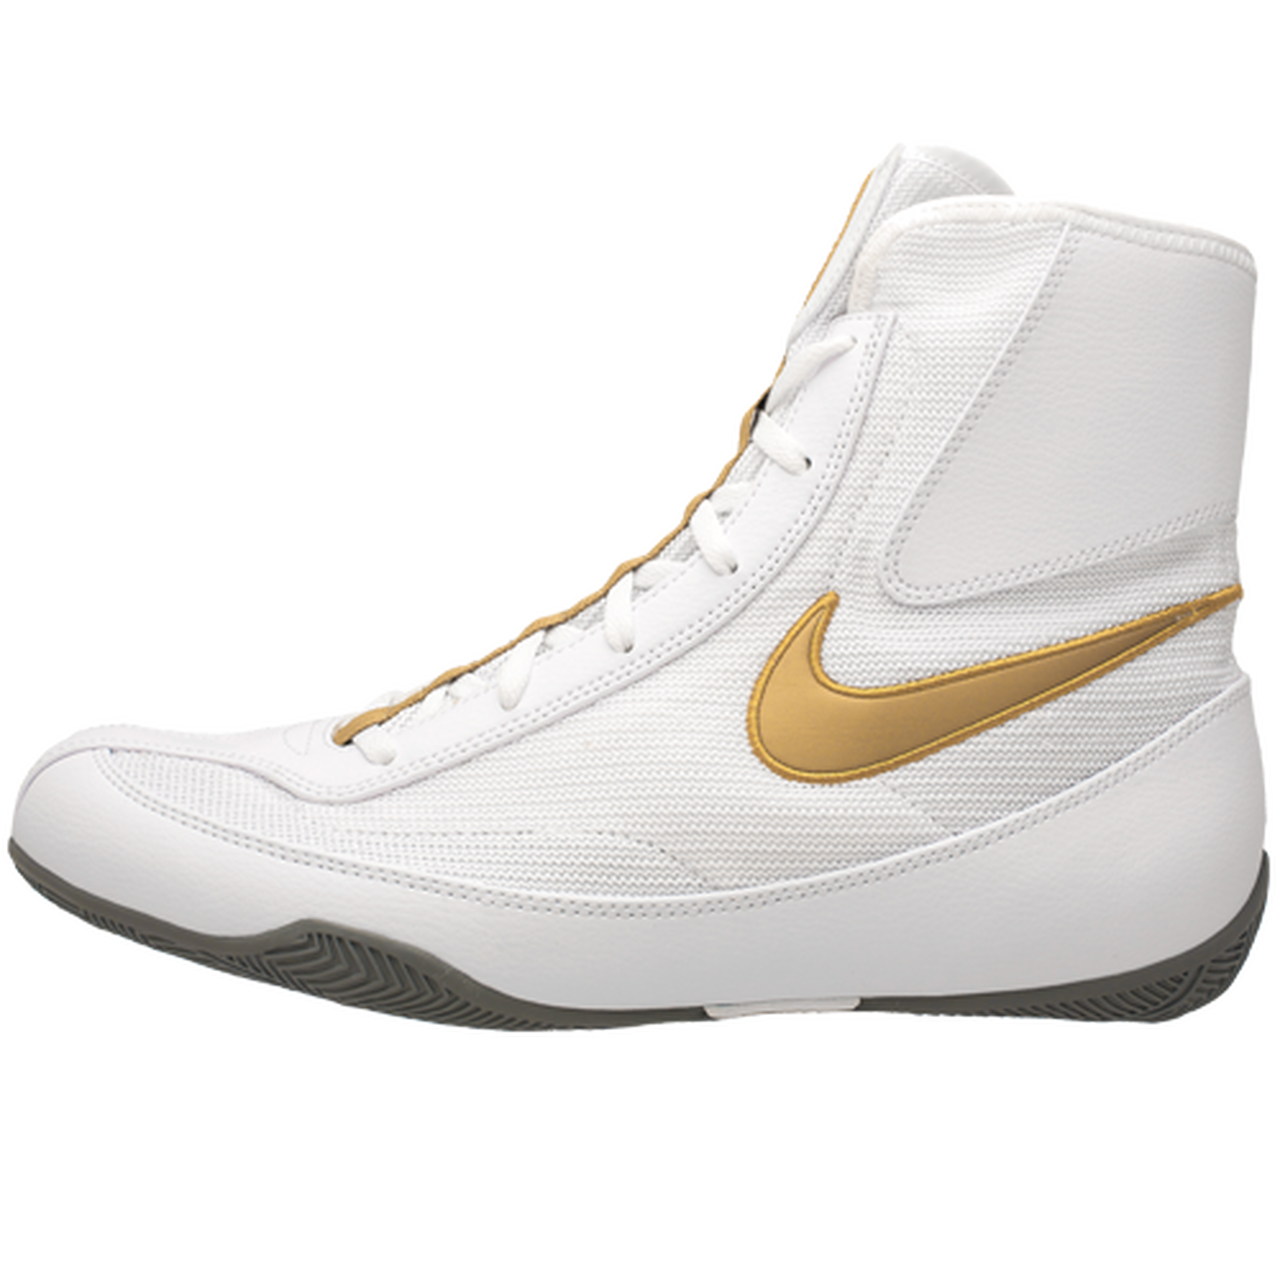 yellow gold nike shoes